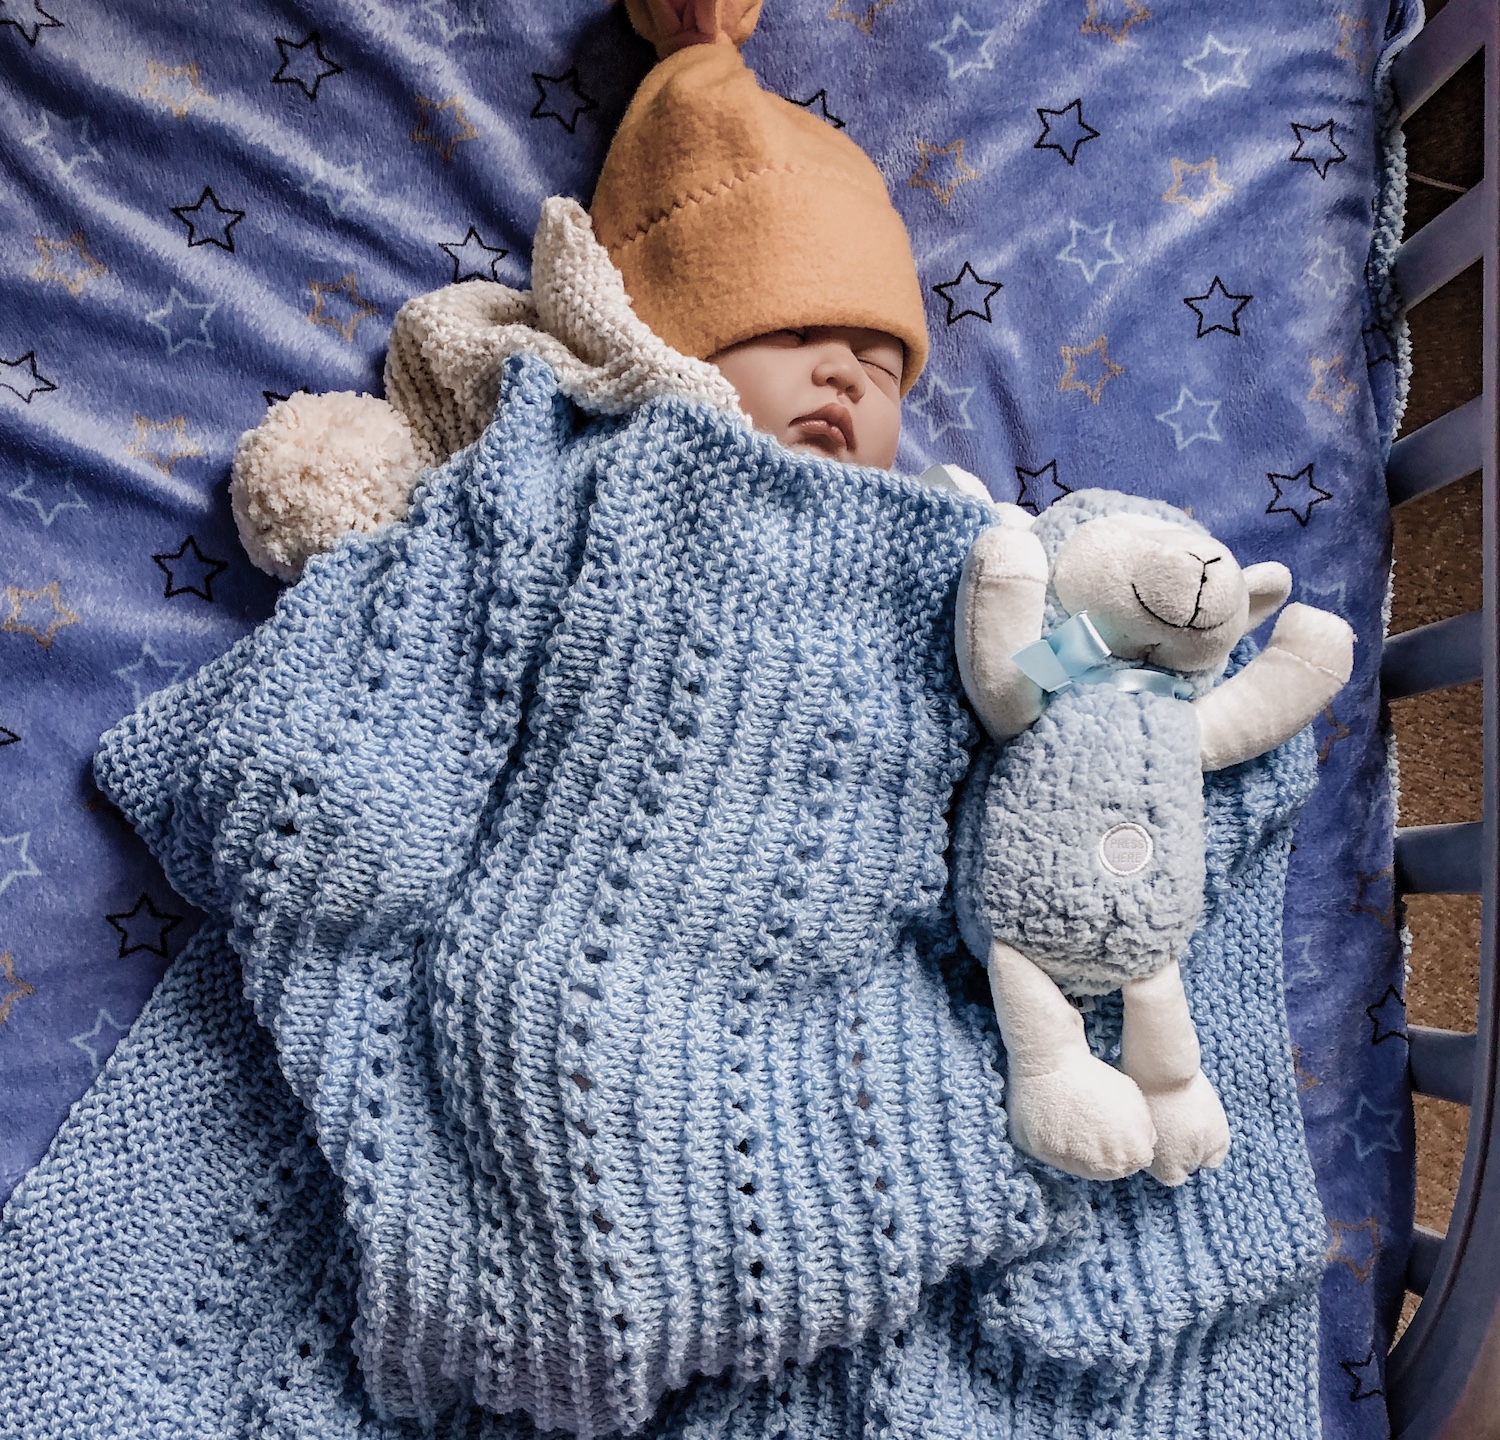 Cuddly knitted wool baby blanket